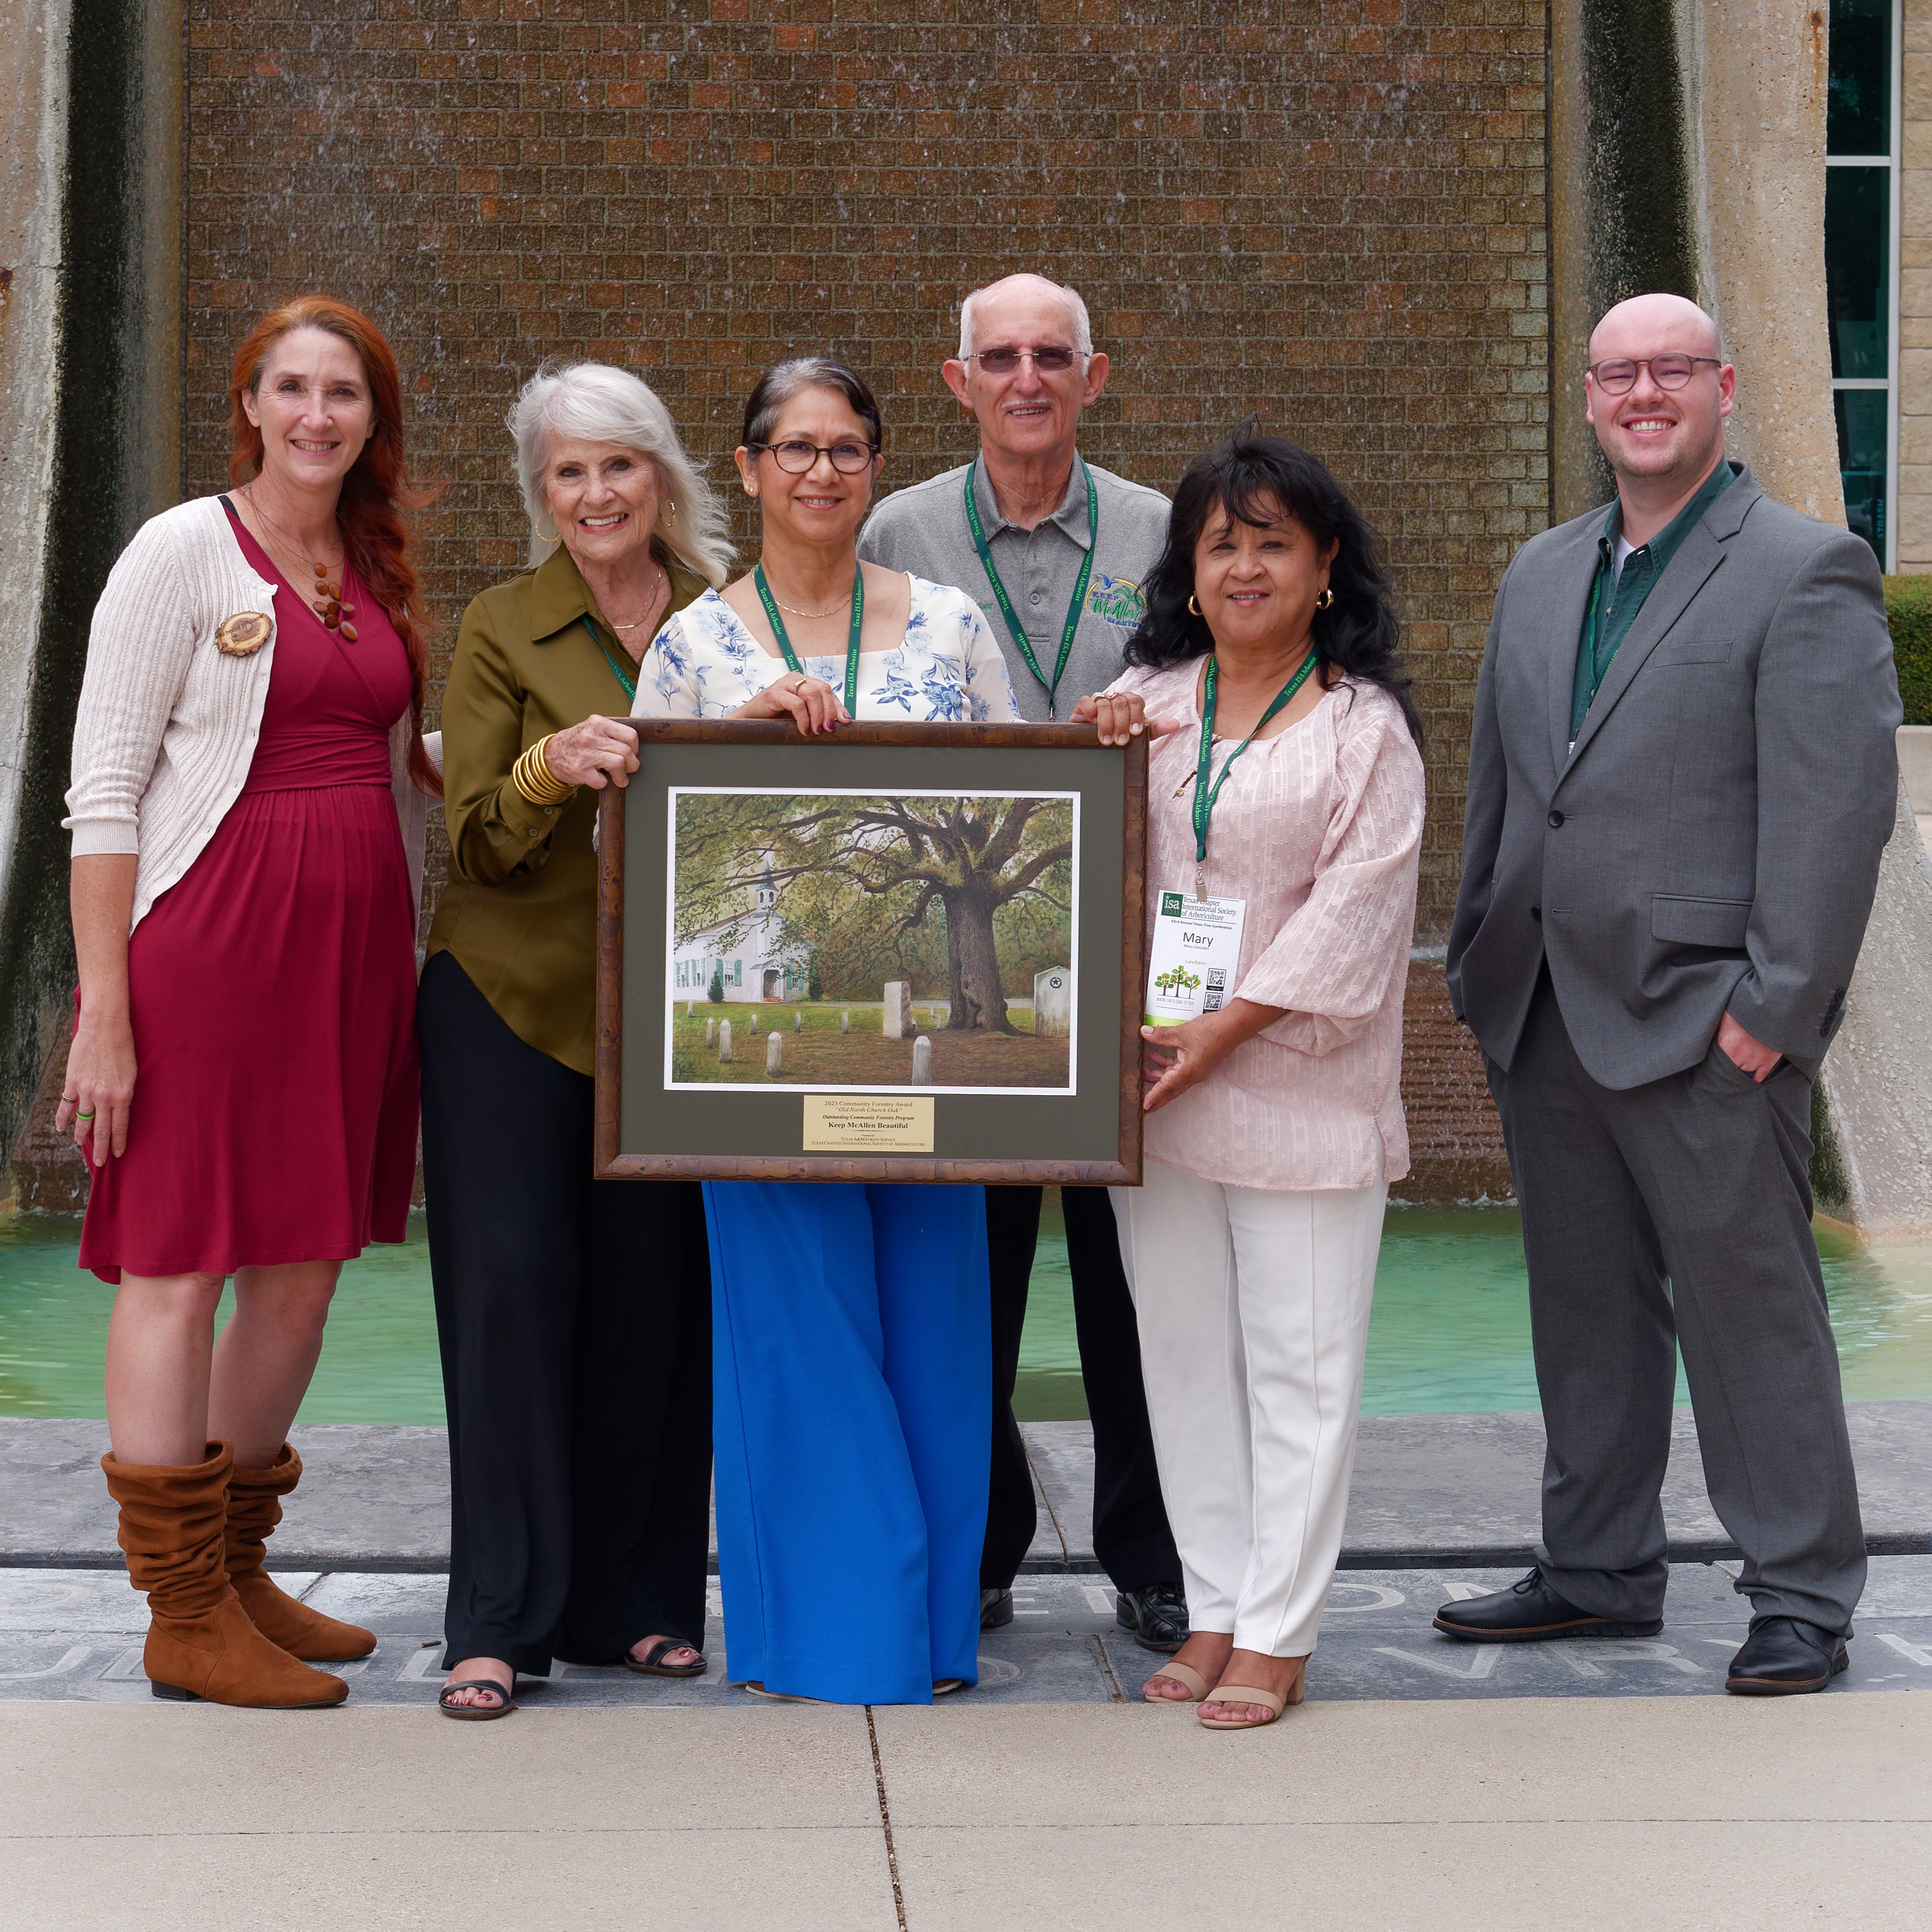 Texas A&M Forest Service and the Texas Chapter of the International Society of Arboriculture (ISAT) recognized the Texas Community Forestry Award winners at the 43rd annual Texas Tree Conference in Waco, Texas.